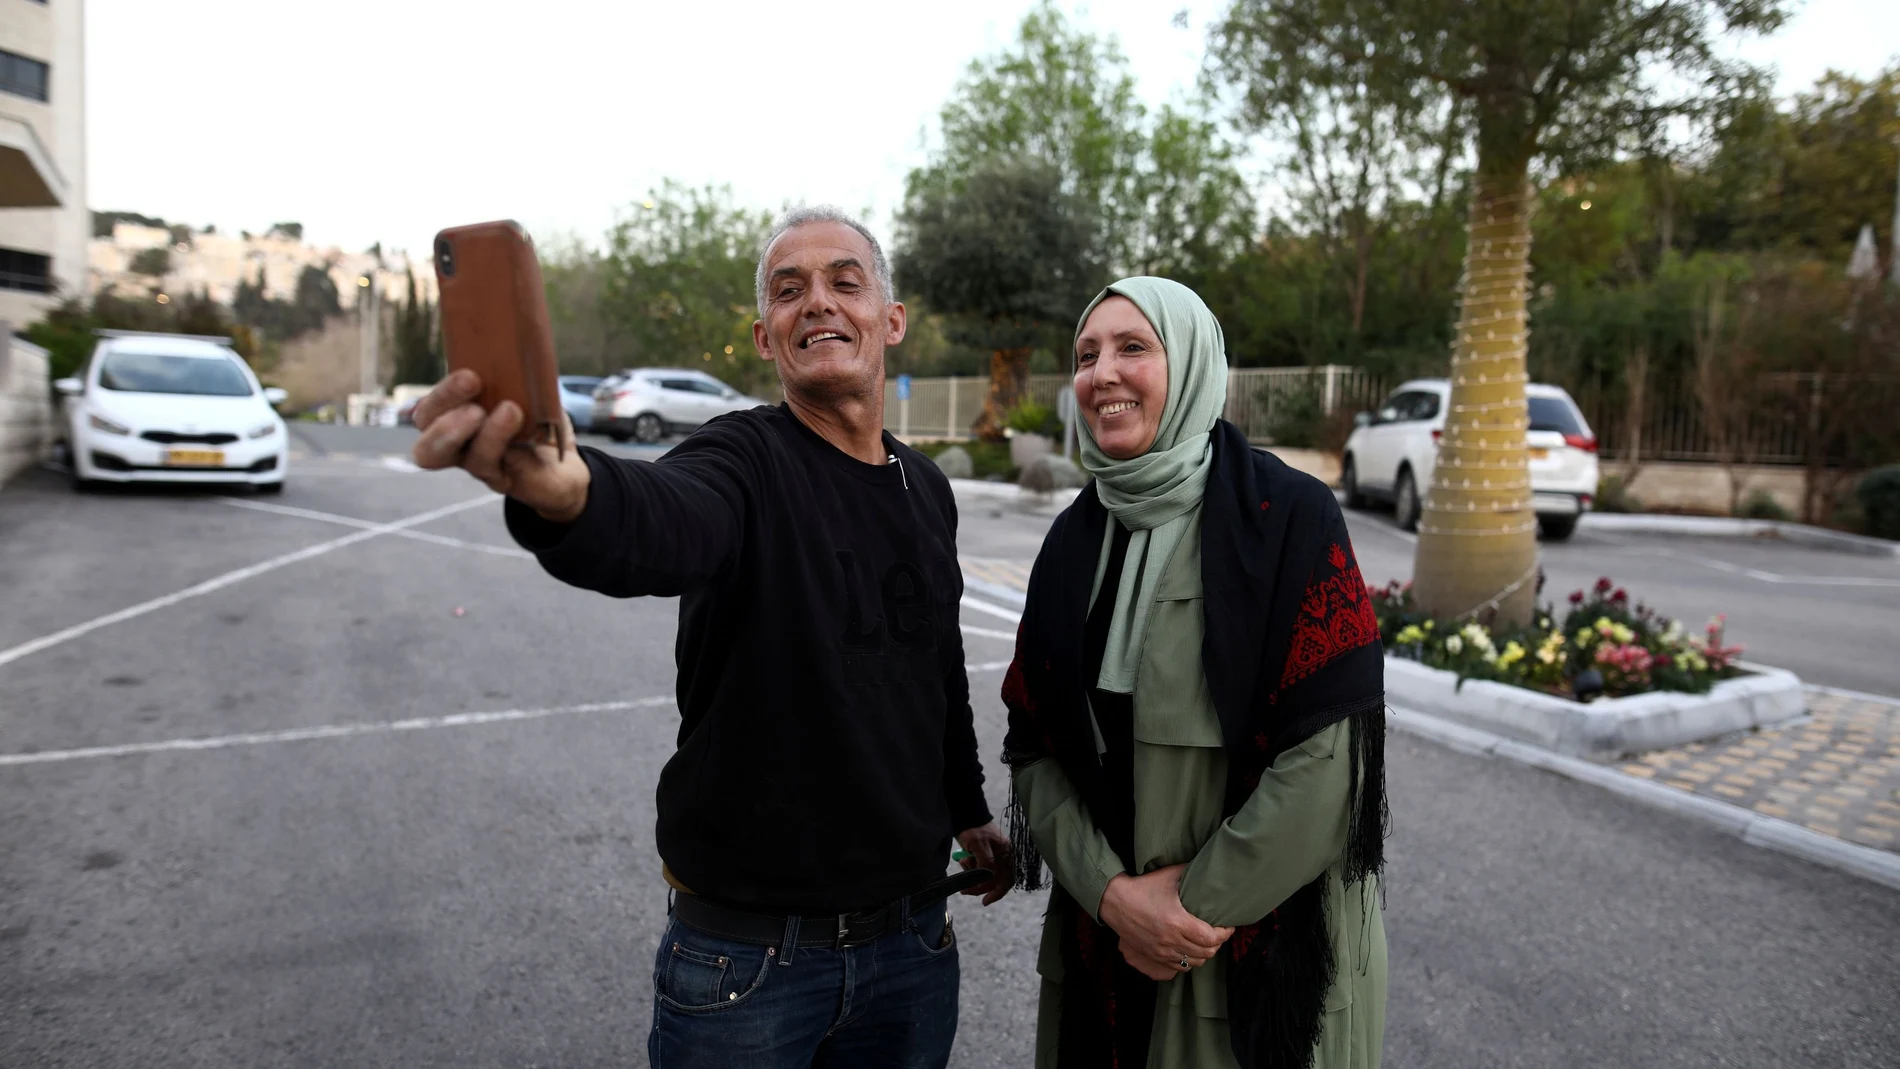 Iman Yassin Khatib, poised to become the first lawmaker in Israel's history to wear a hijab or head scarf, which she does as a Muslim, following results of her Arab Joint List party in Israel's election, takes a selfie with a friend in Nazareth